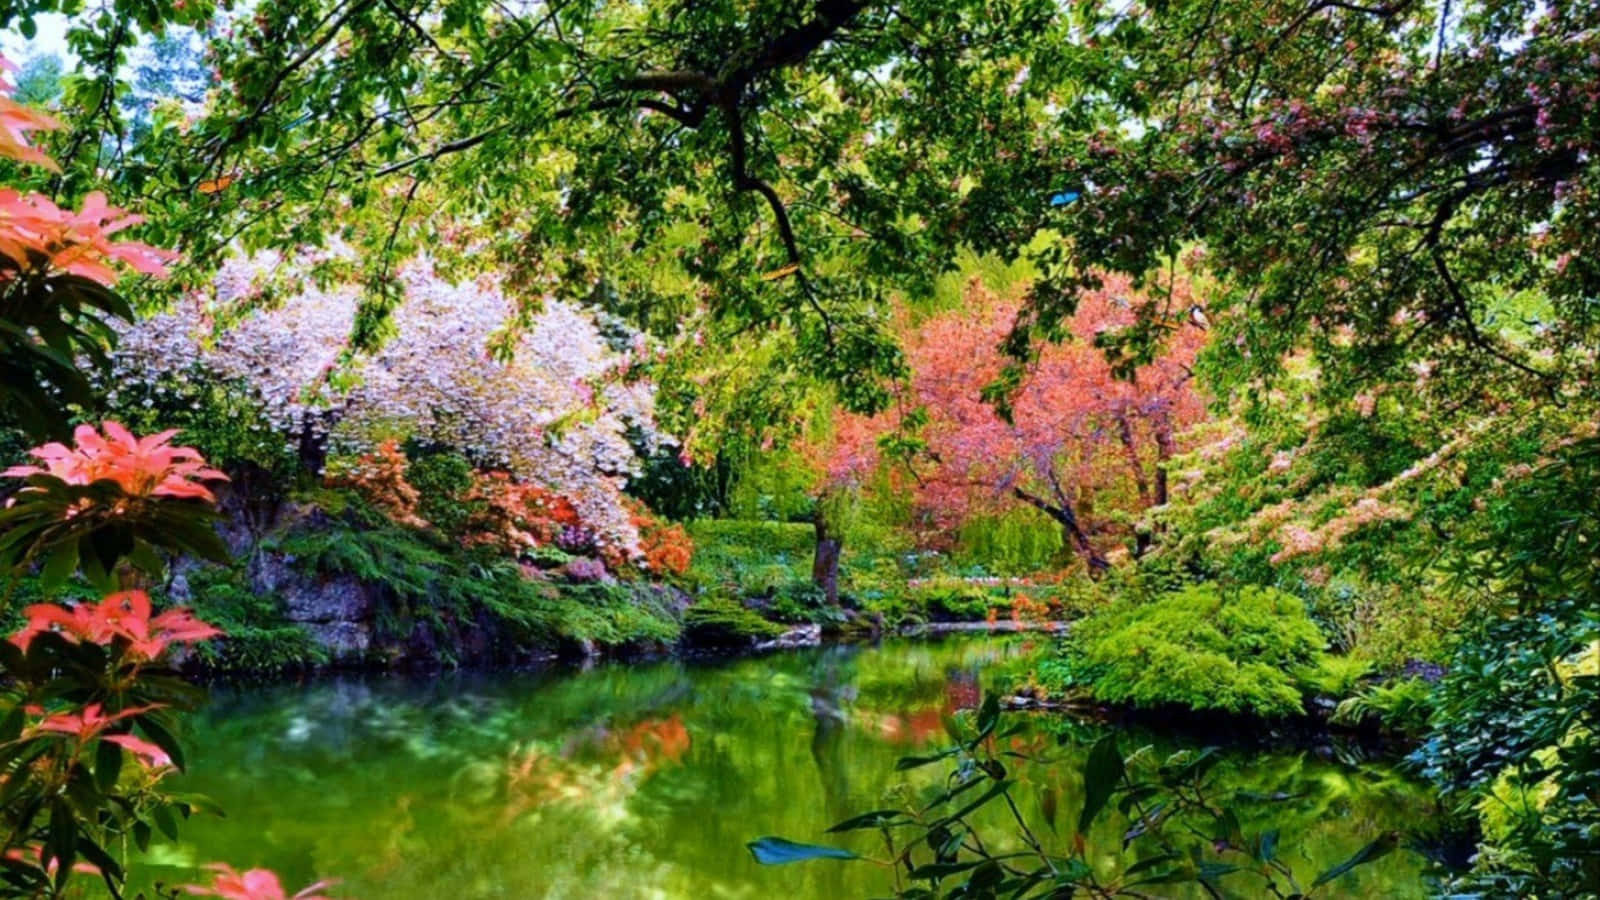 Enjoy the tranquility of Nature in a Garden